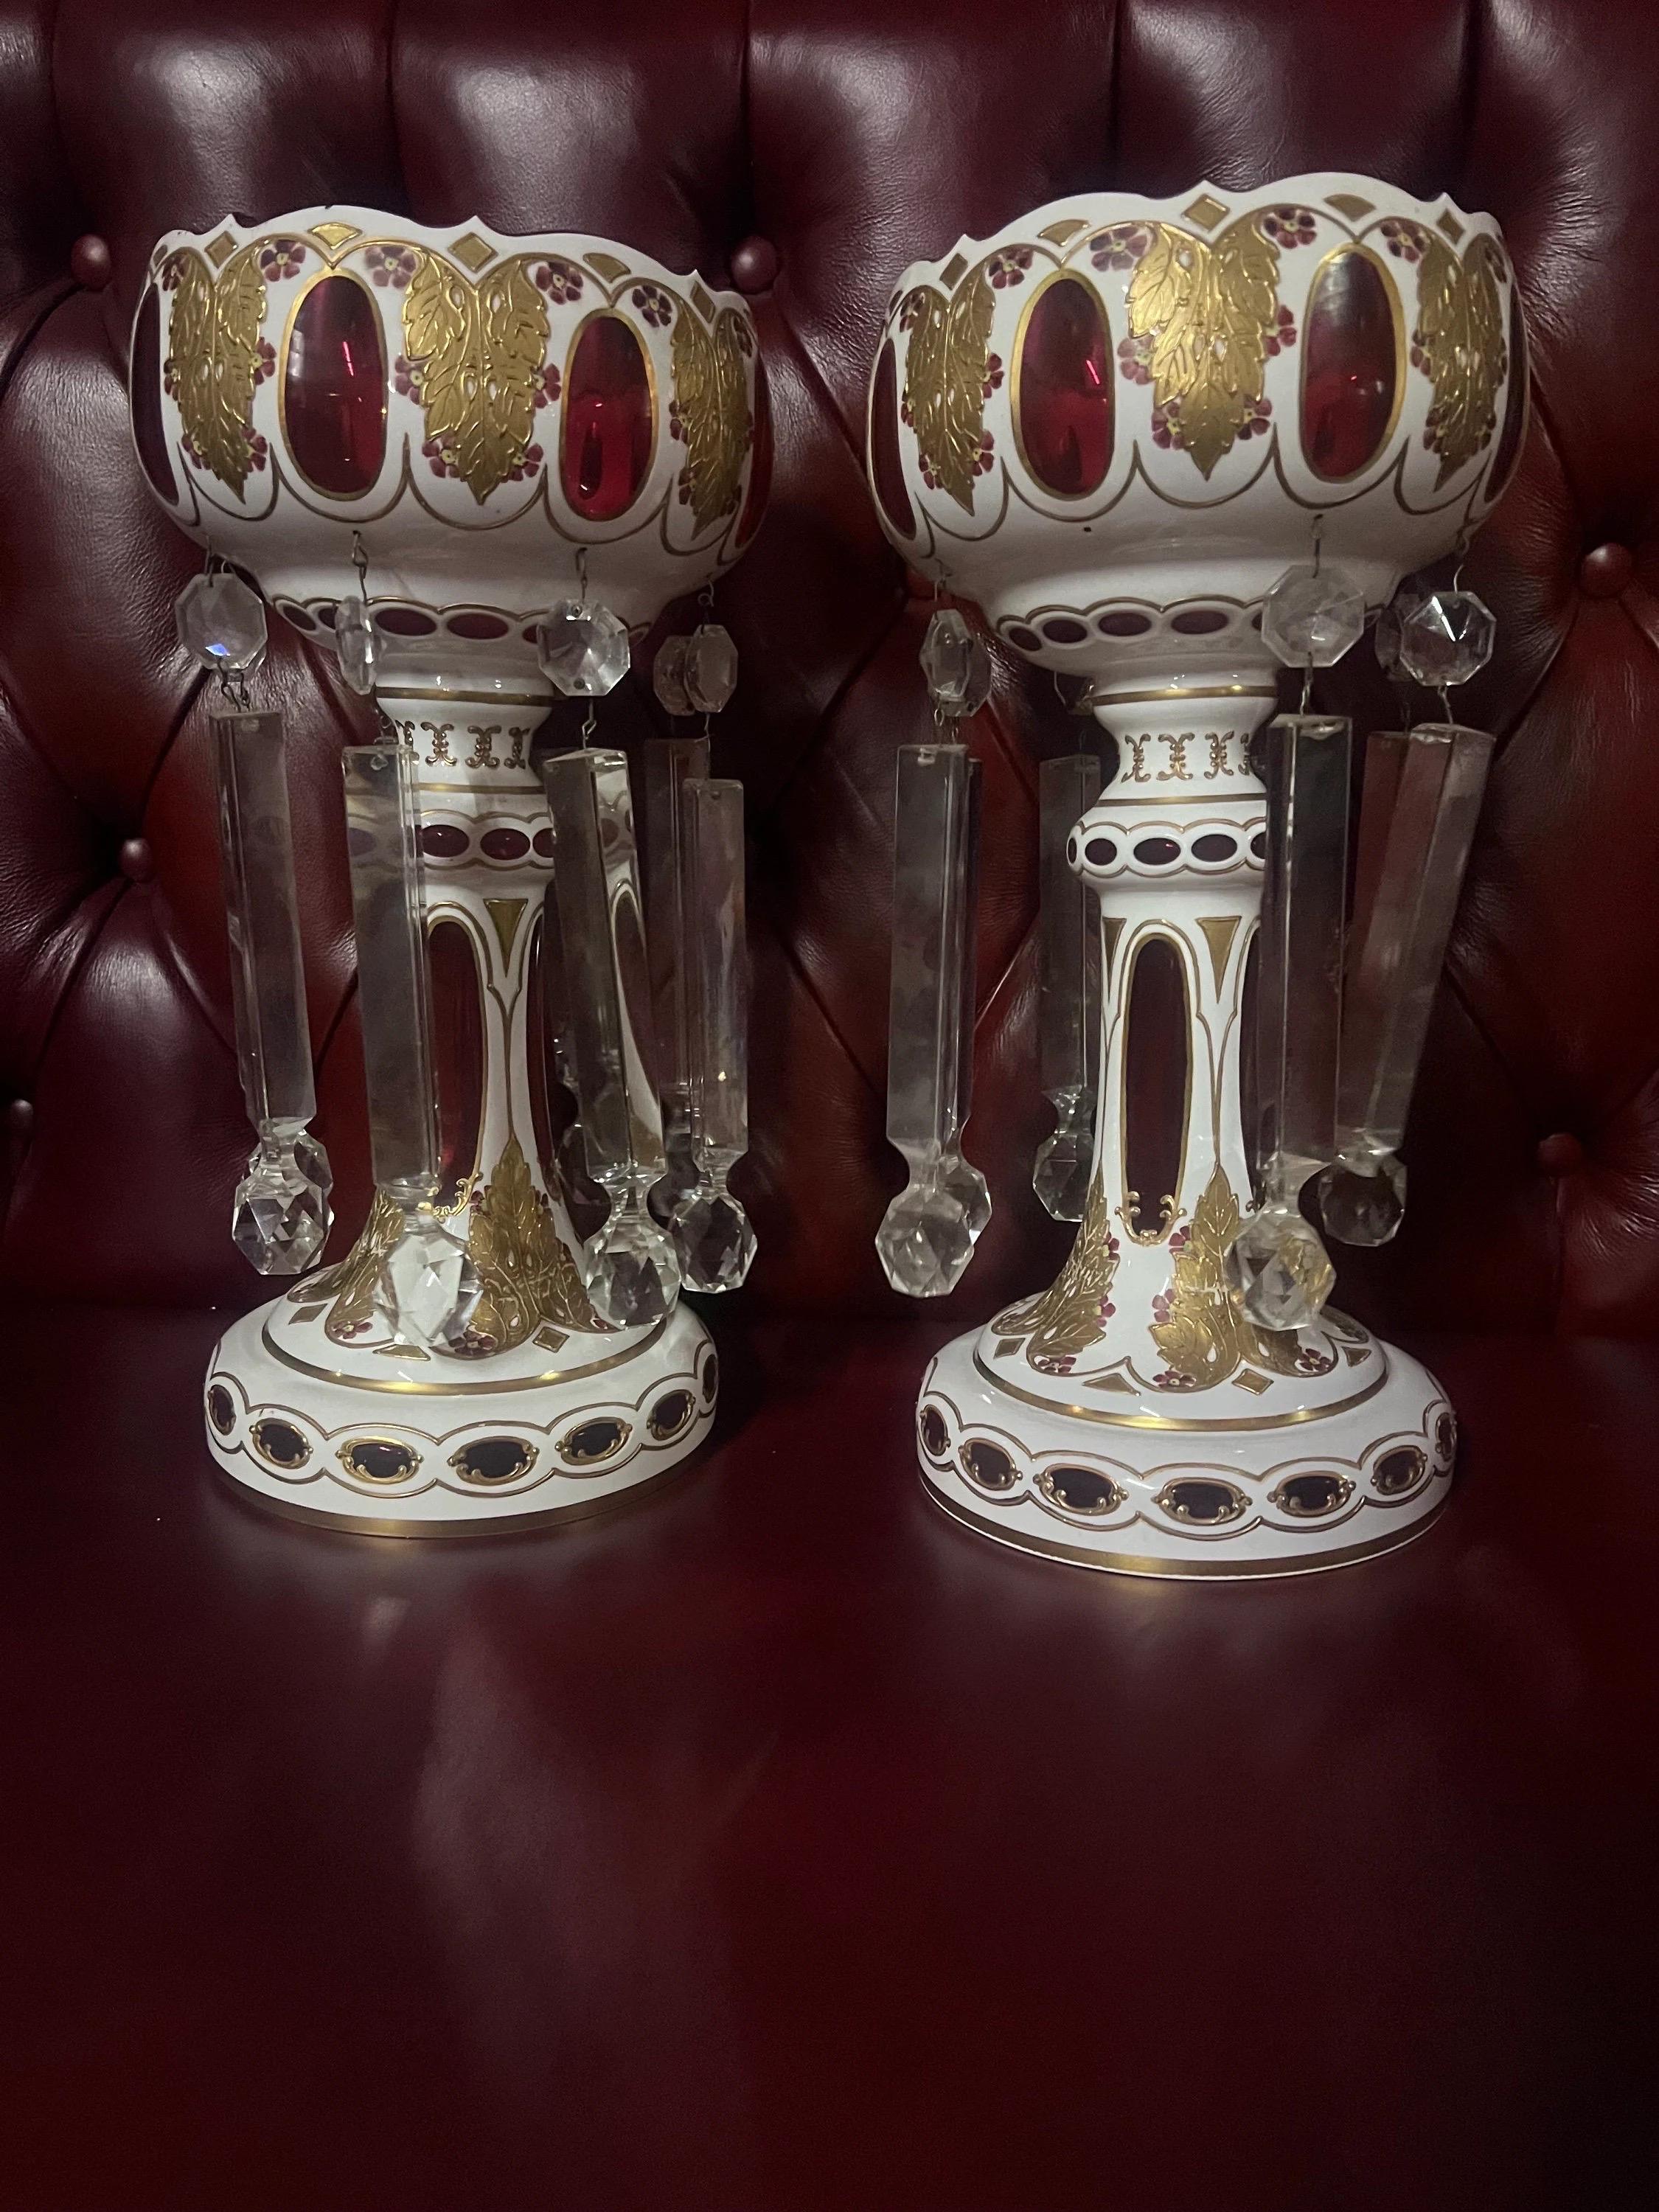 Antique Bohemian Cranberry Glass Candle Lusters - Pair 

Gorgeous Antique Bohemian White Cut to Red Glass Candle Holder, Listers with 8 Hand Cut Crystal Prisms, Hand Painted with Flowers, Foliage and Gilt Scrolls. Truly Spectacular!

Circa 20th